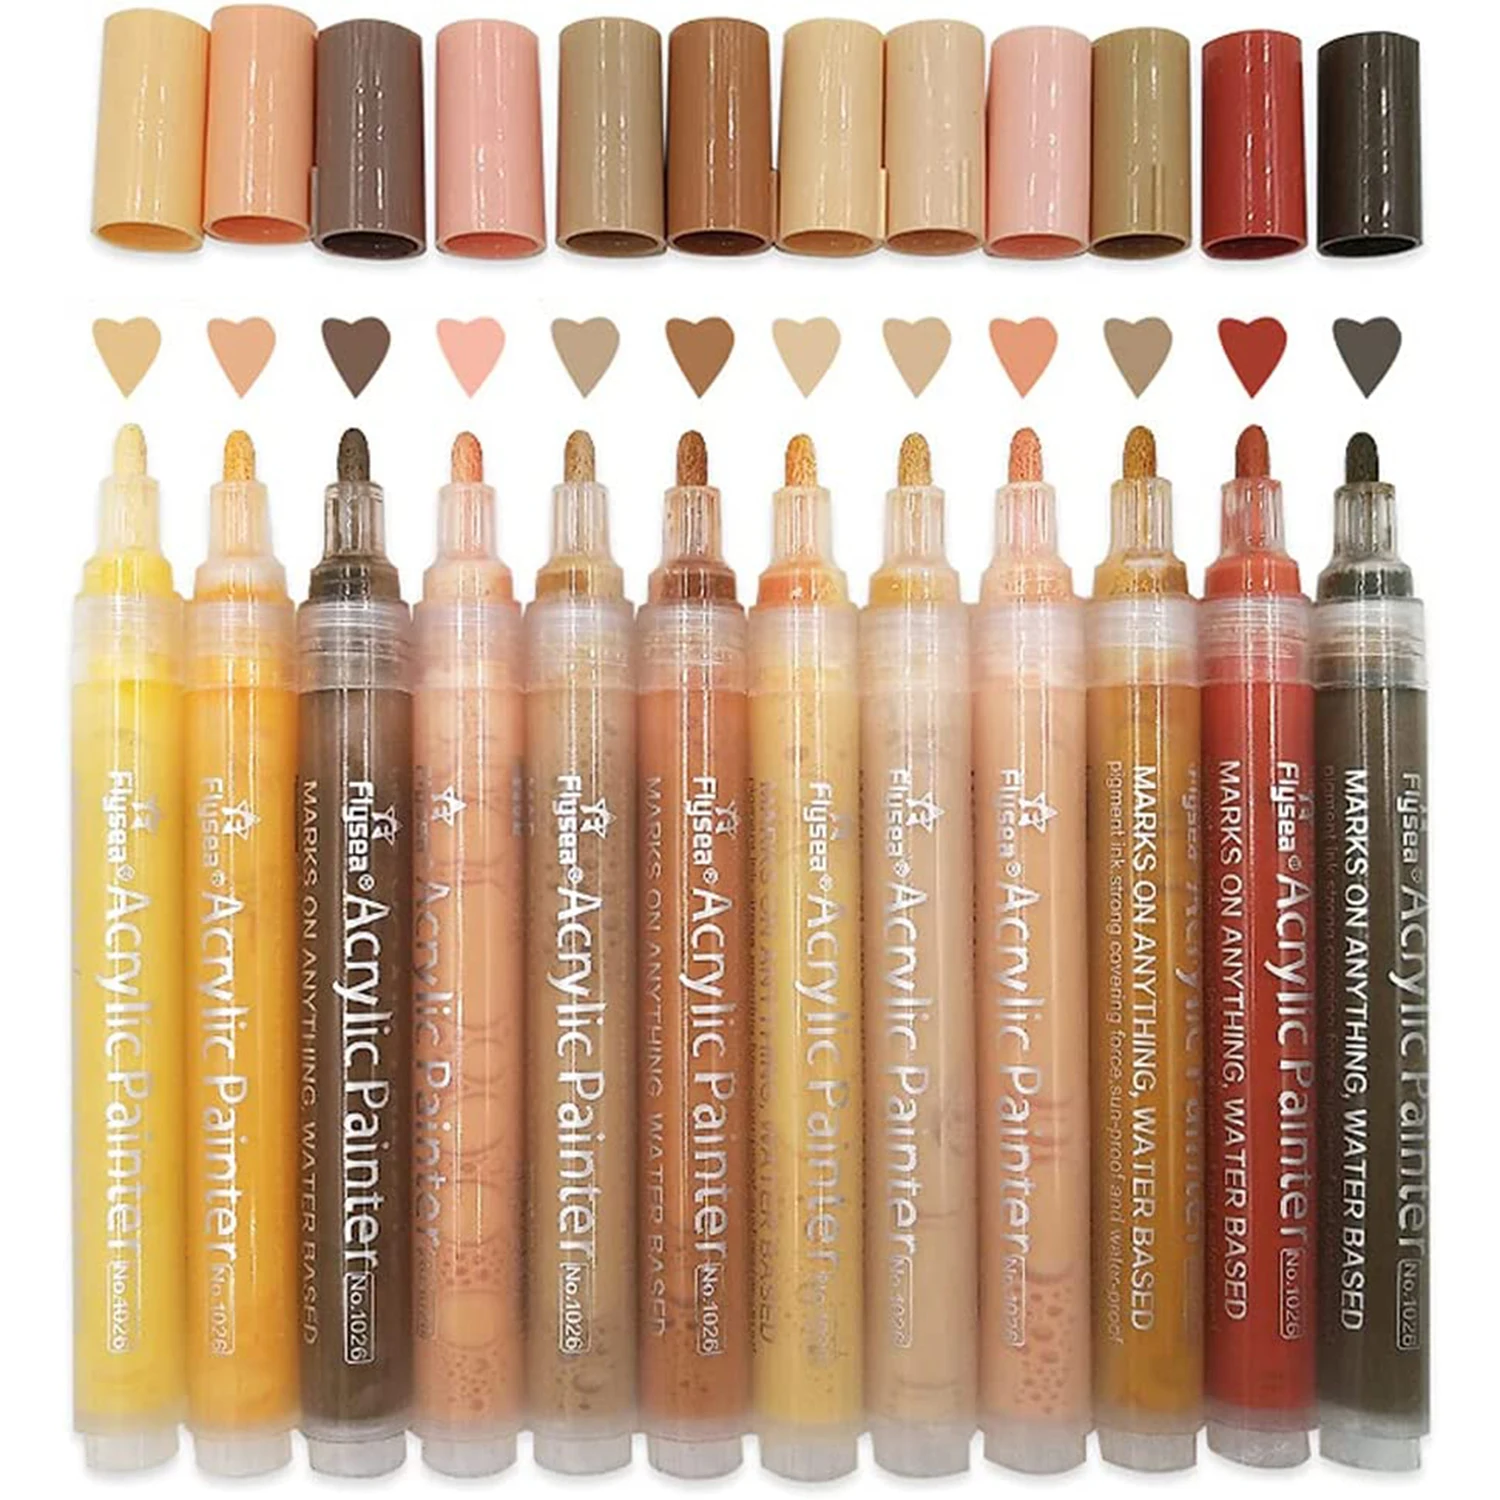 

Skin Tone Markers, 3.0mm Tip Acrylic Skin Color Colors Paint Markers for Painting, Sketch Portrait Drawing Acrylic Paint Marker